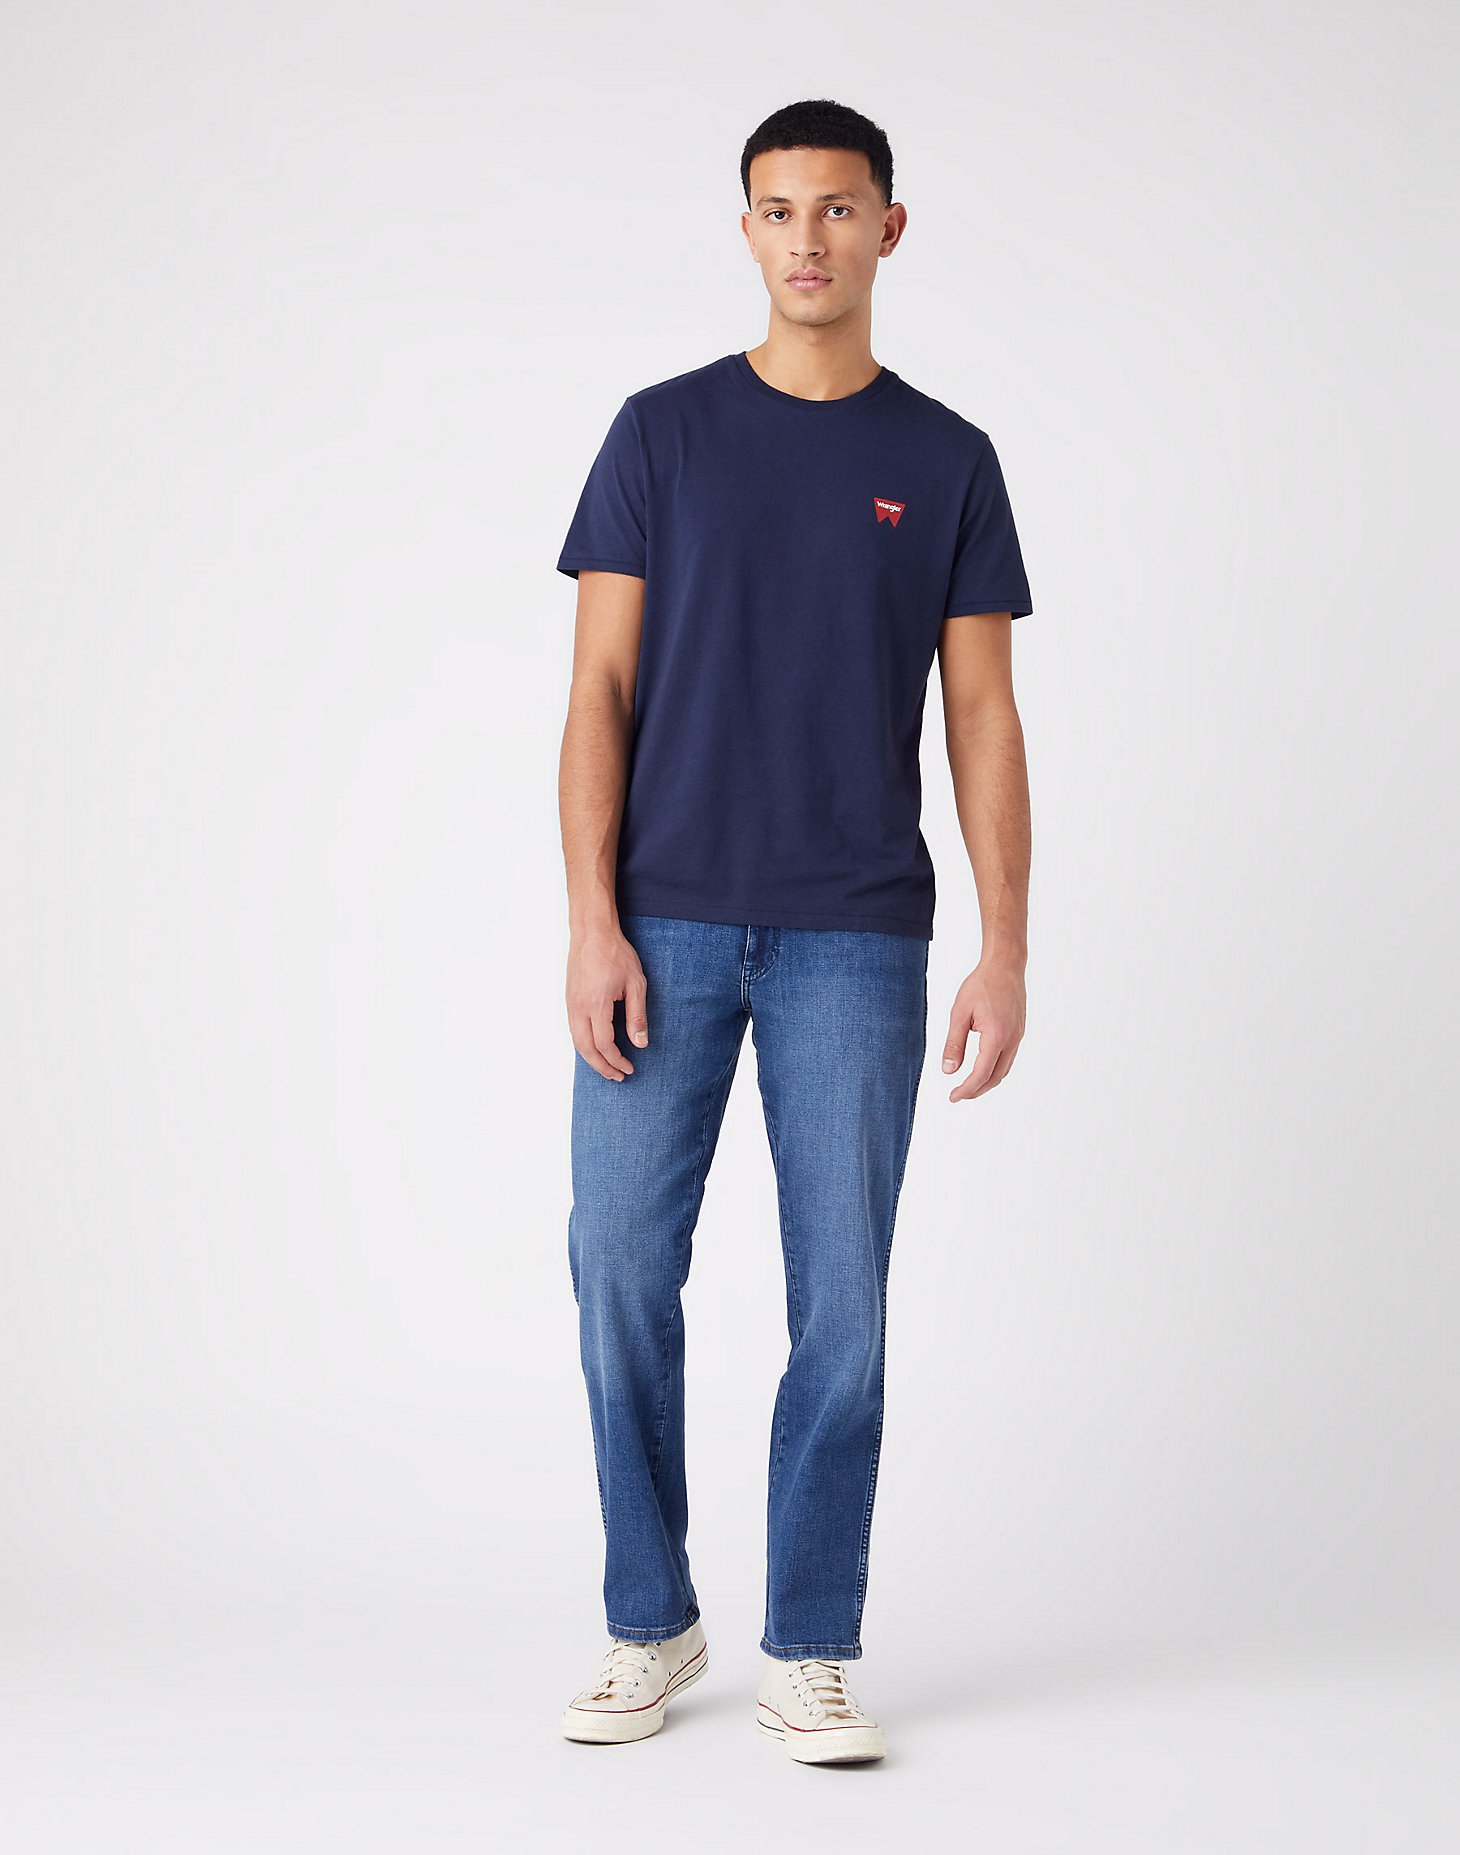 Sign Off Tee in Navy alternative view 1